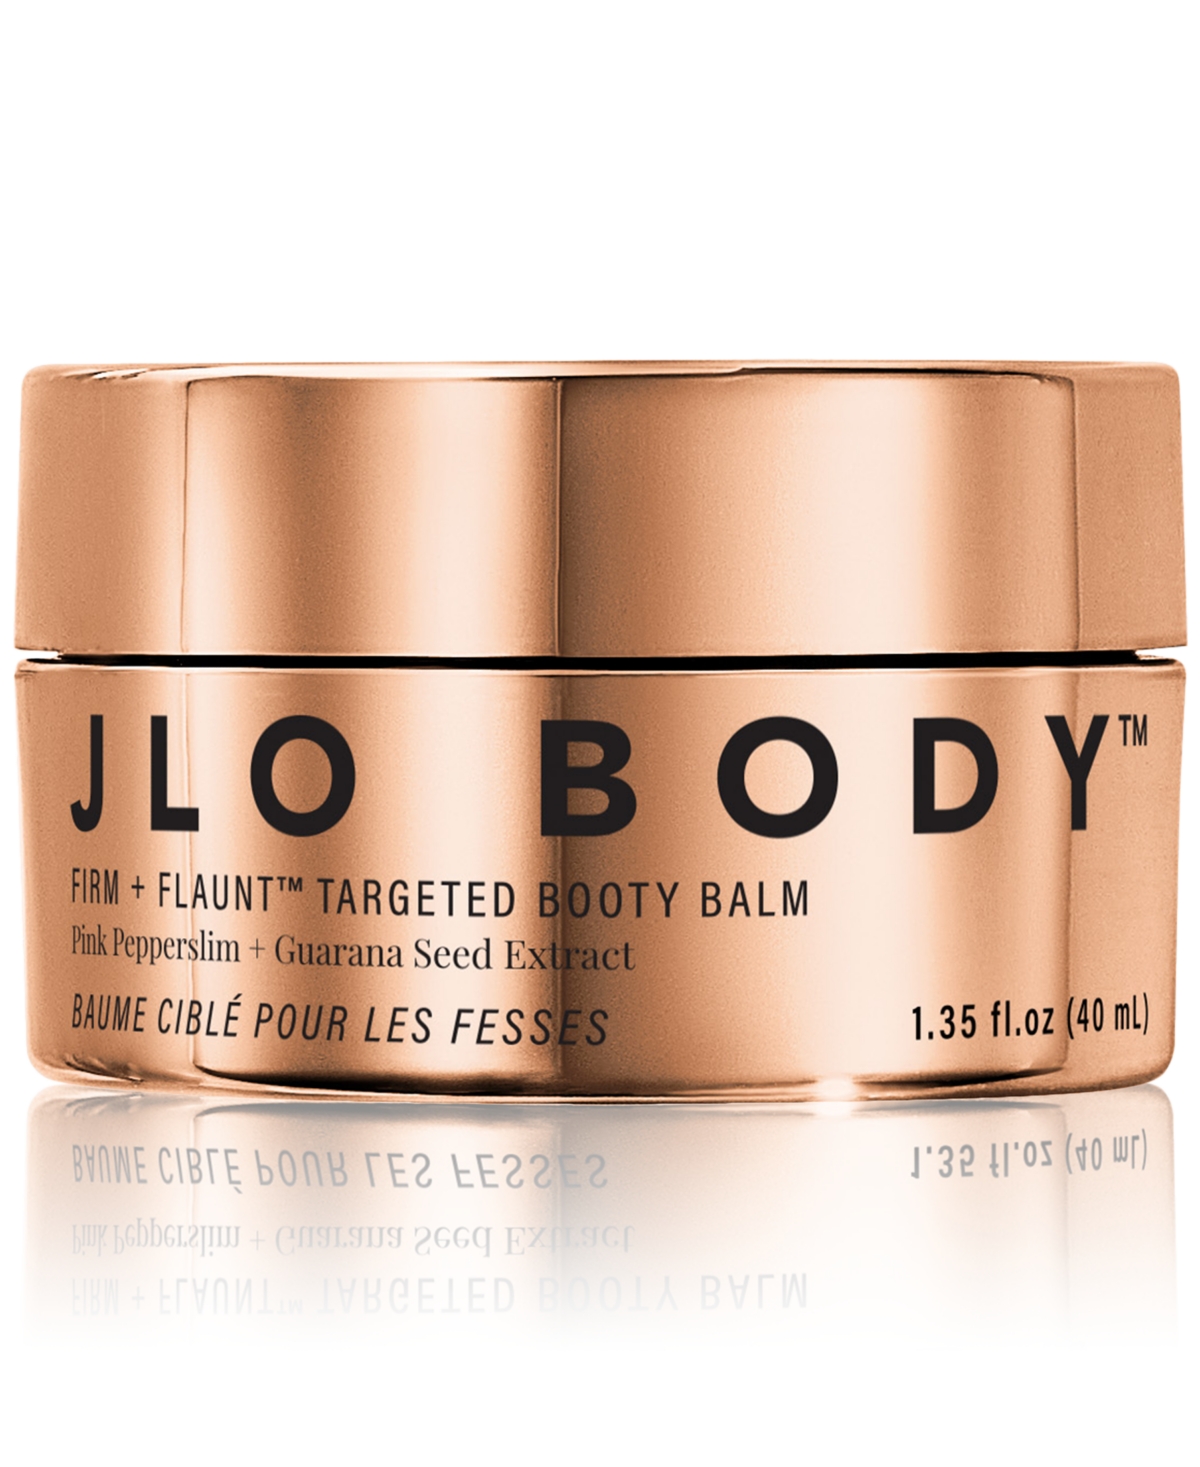 Firm + Flaunt Targeted Booty Balm, 40 ml